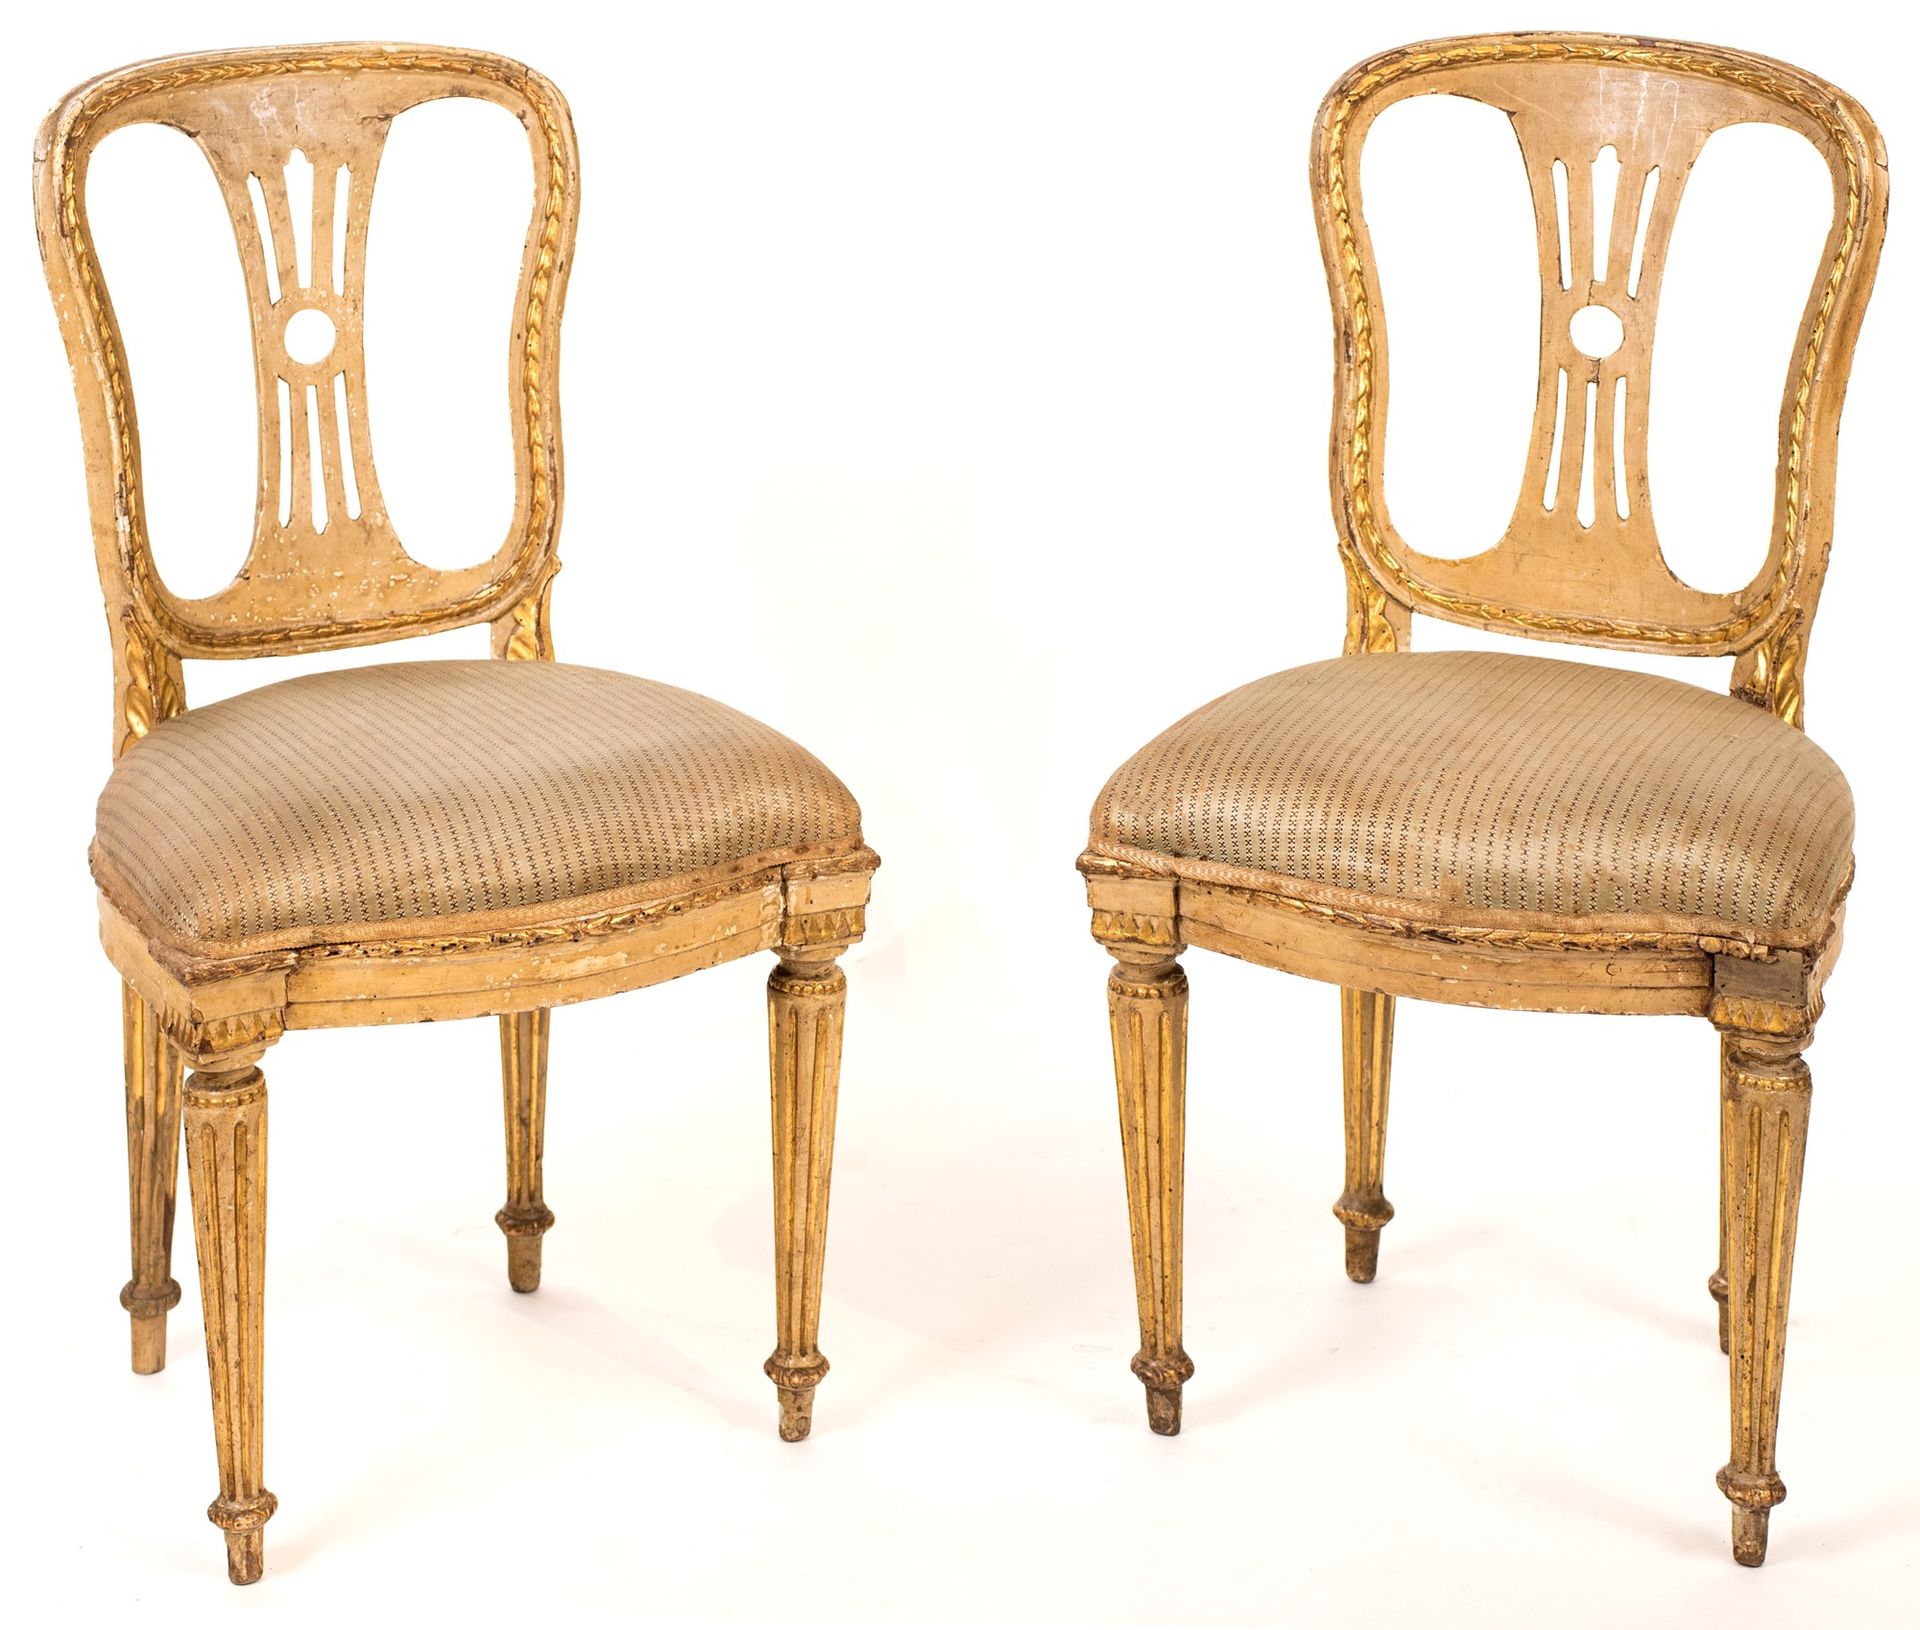 Pair of chairs in lacquered wood, late 18th century vergoldet entlang der Profil&hellip;